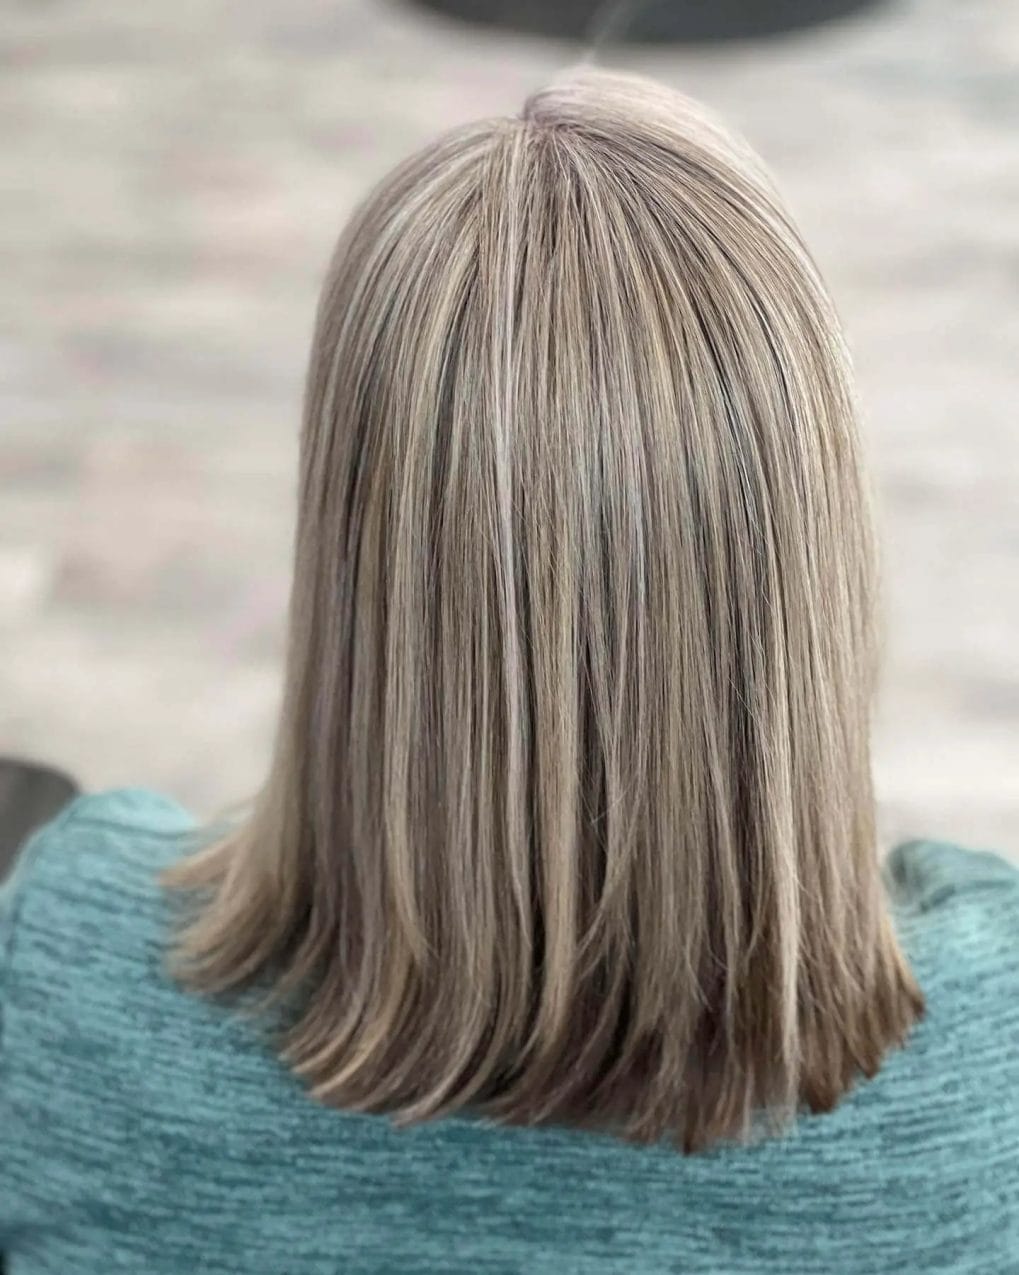 Chic mid-length ash blonde and gray blend in a sleek, straight style.